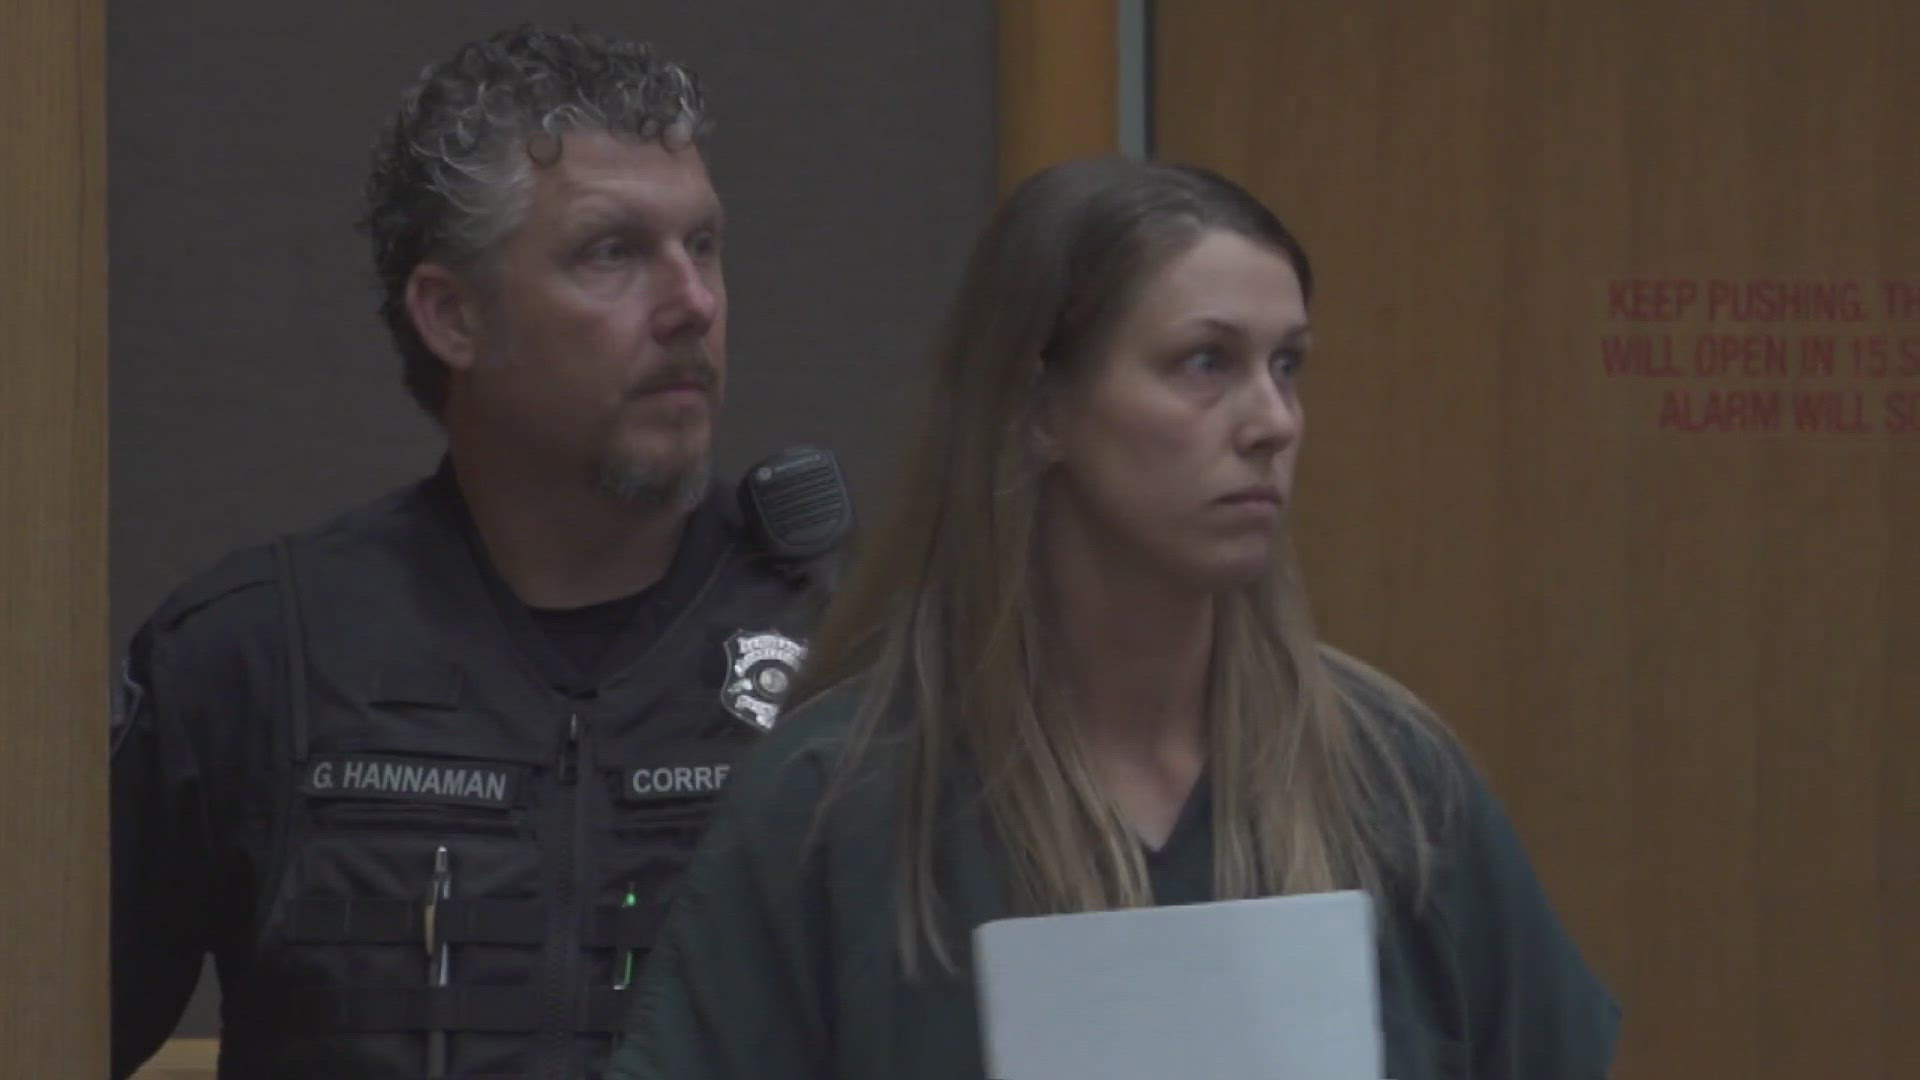 Gardner is accused of orchestrating what investigators call a "murder-for-hire plot" in the killing of her ex-husband, Jared Bridegan. The hearing is at 1 p.m.